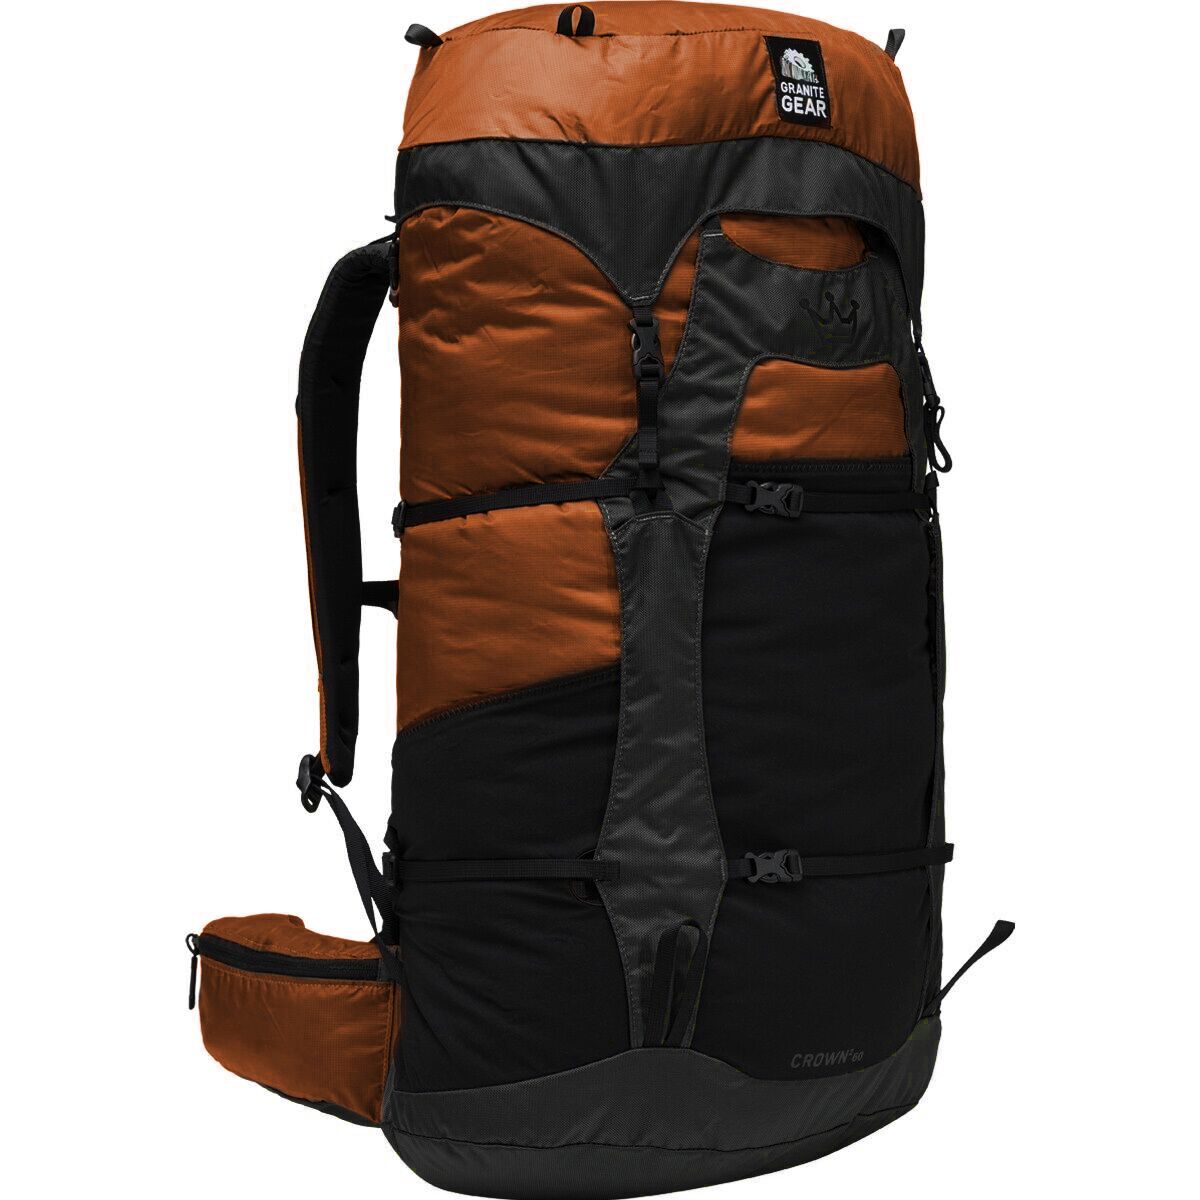 Granite Gear Crown 2 Limited Edition 60L Backpack - Hike & Camp